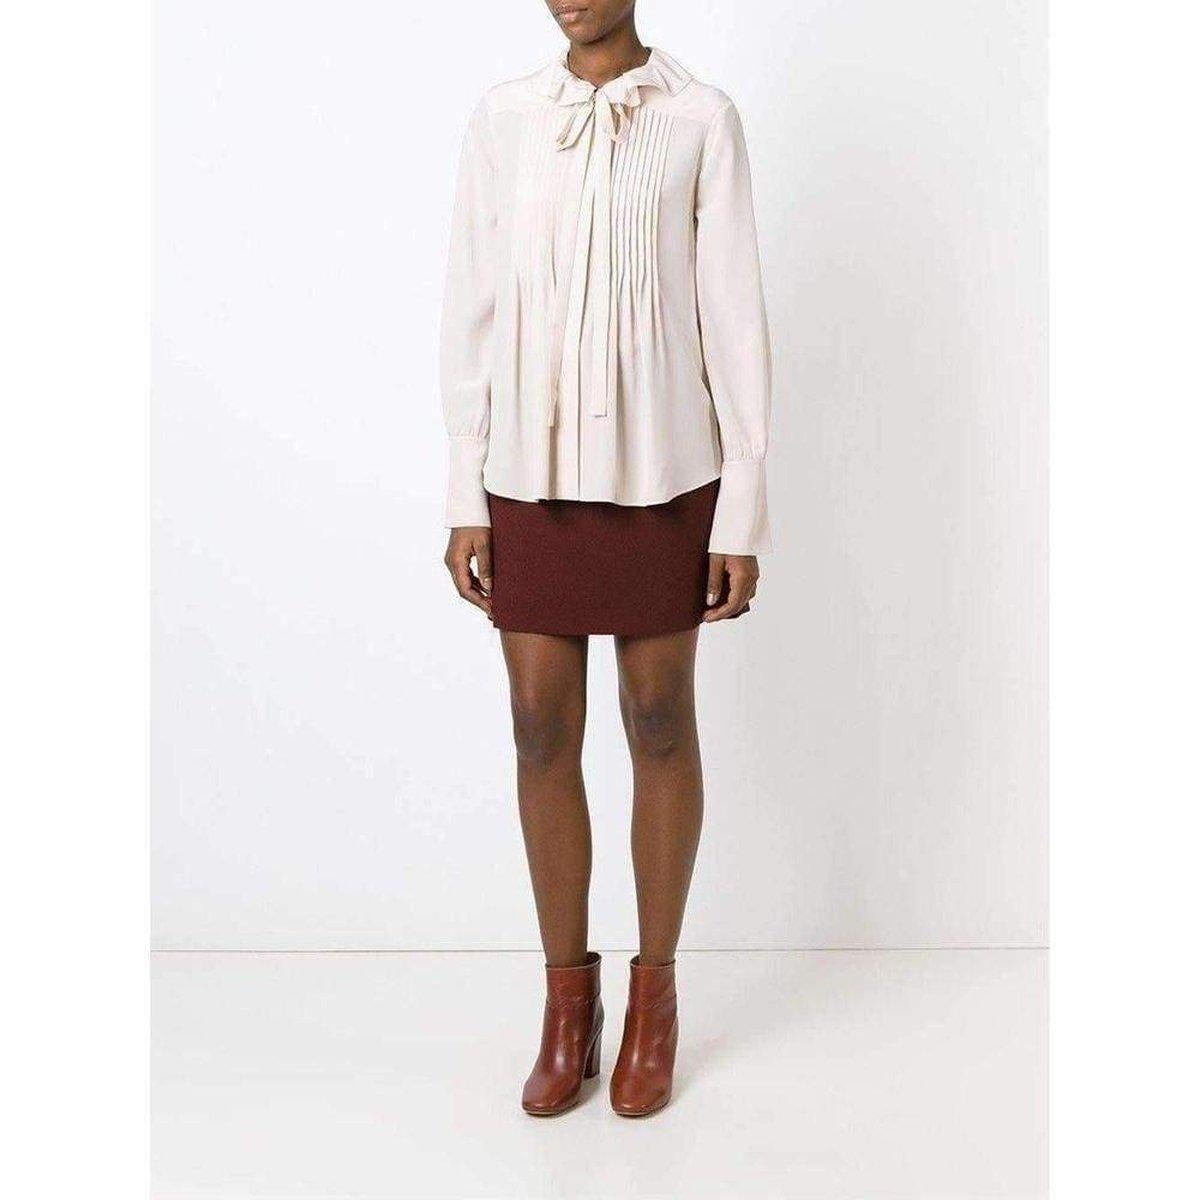 FOLLOW US @RUNWAYCATALOG

Albaster silk bow detail shirt from Chloé
Classic collar
Long sleeves
Concealed fastening
Front pleated yoke and bell sleeves. 
Composition Silk 100% 
Dry Clean Only 

Measurements for sz 38 
Bust: 34” 
Length: 33” 
Sleeve: